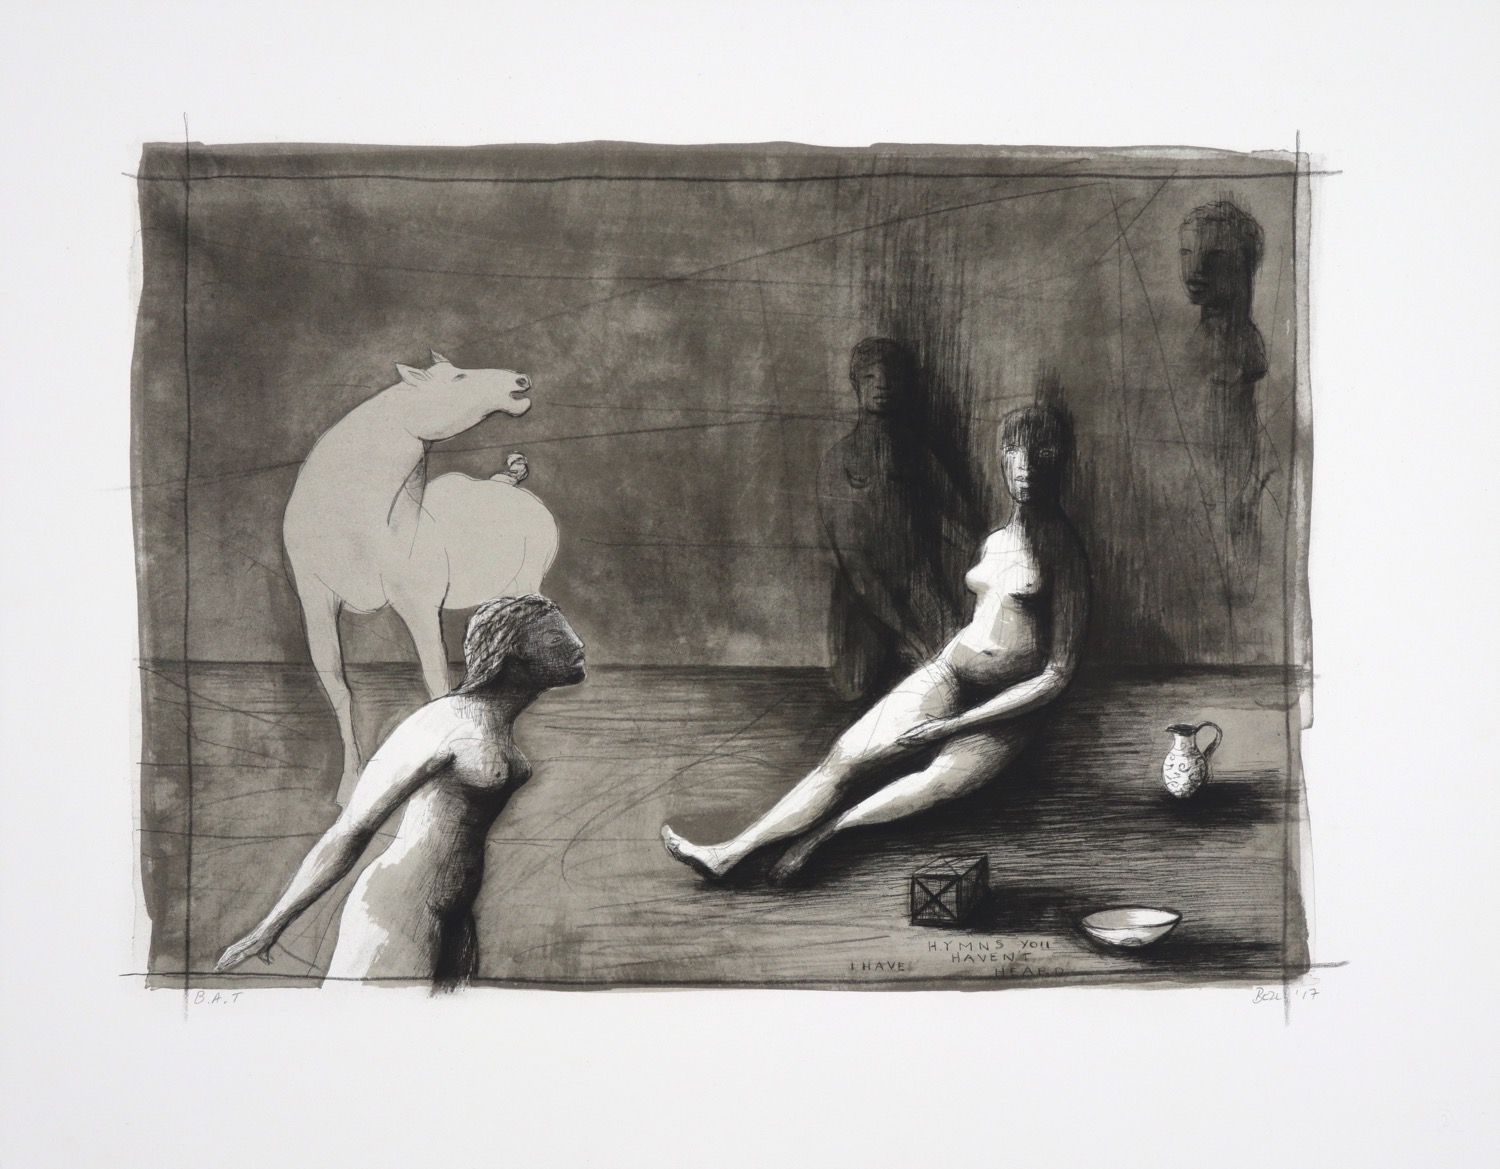 Three naked female figures in a shared space with a horse and objects